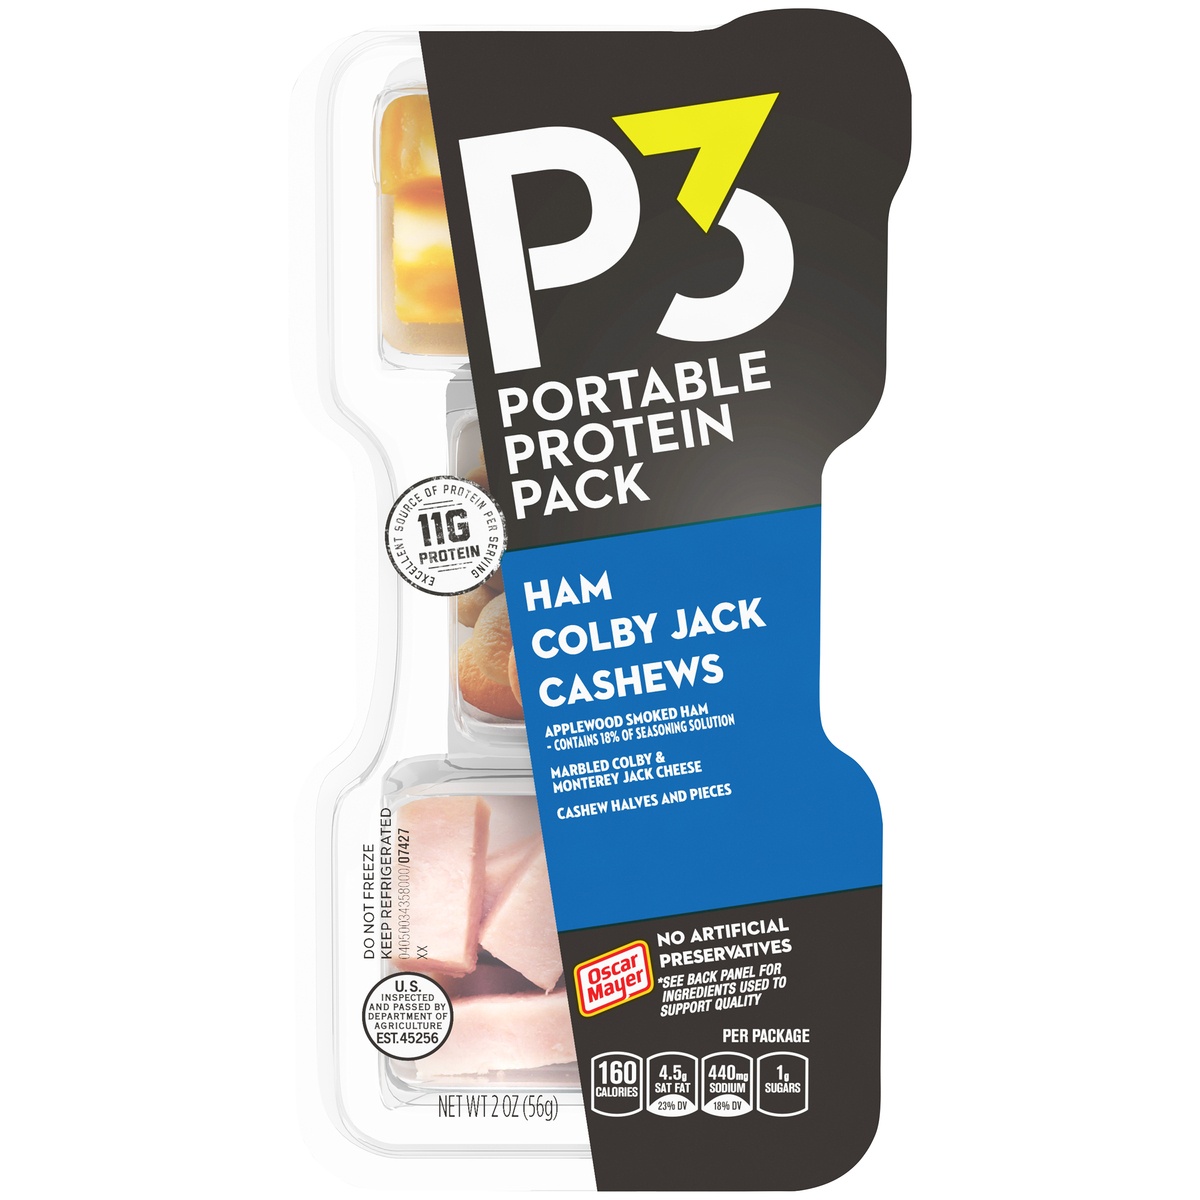 slide 1 of 4, P3 Portable Protein Pack Ham, Cashews Colby Jack Cheese, for a Low Carb Lifestyle, 2 oz Tray, 2 oz